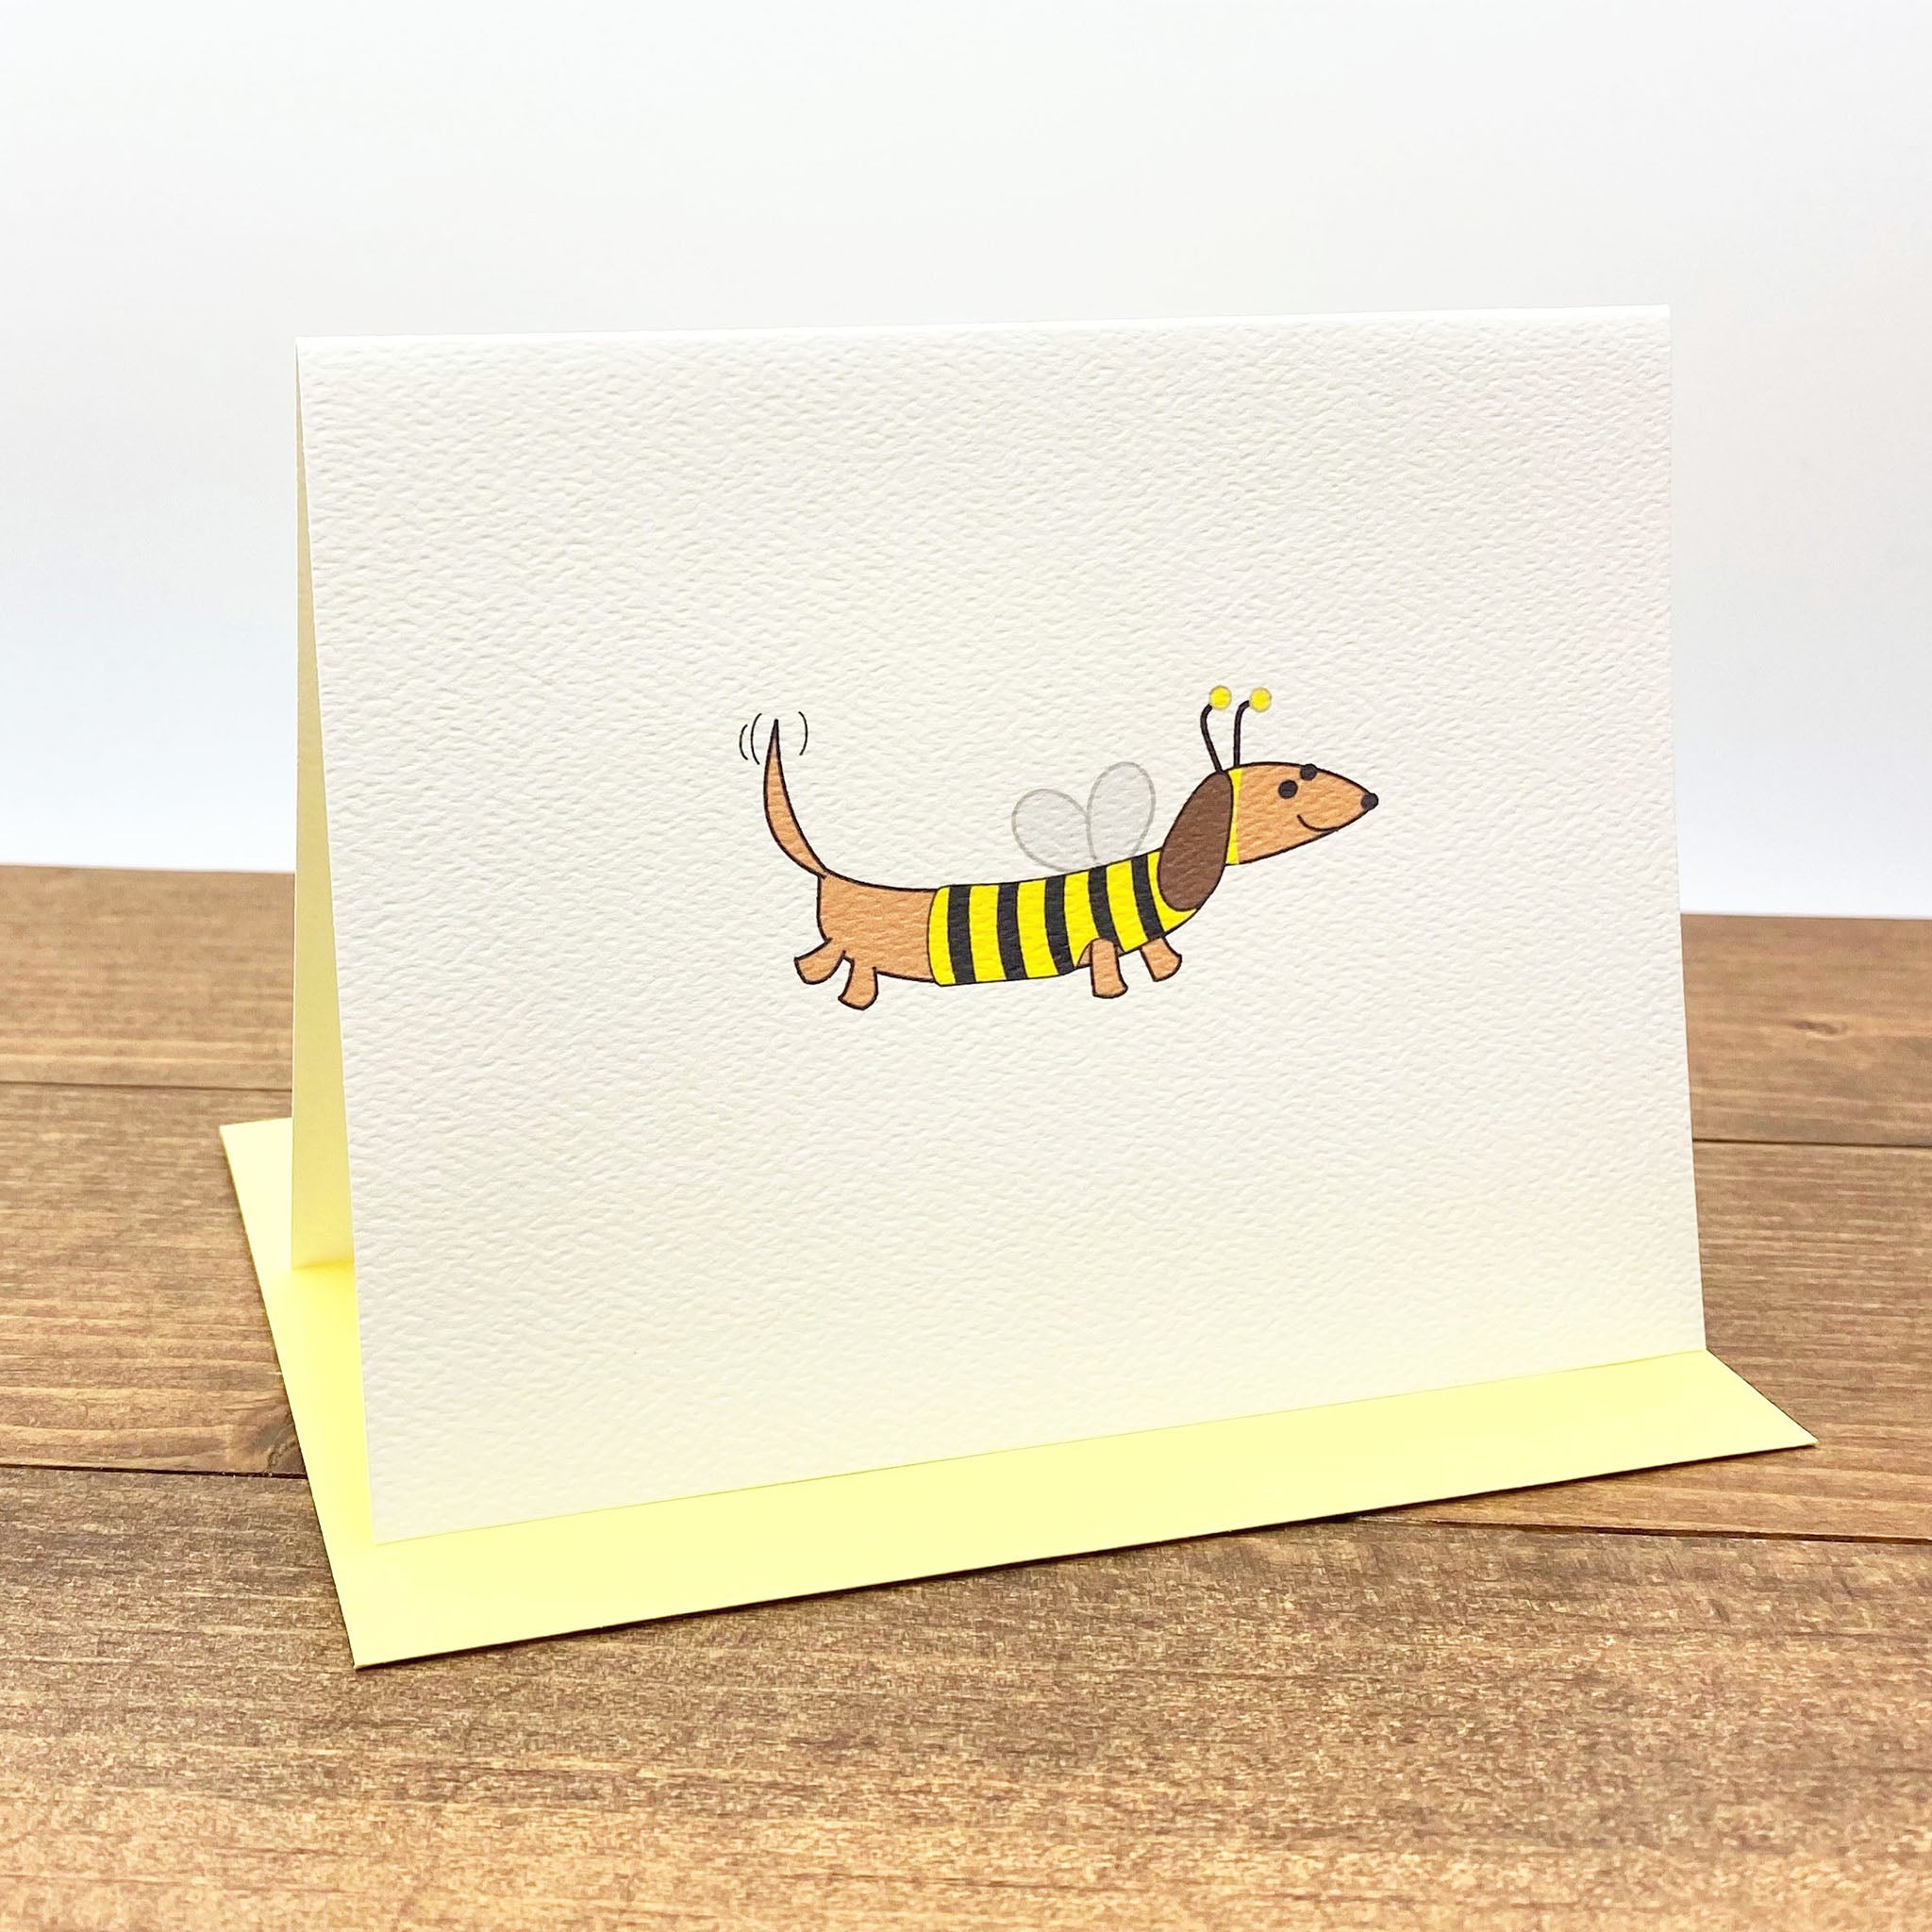 Dachshund dressed as bumble bee note cards.